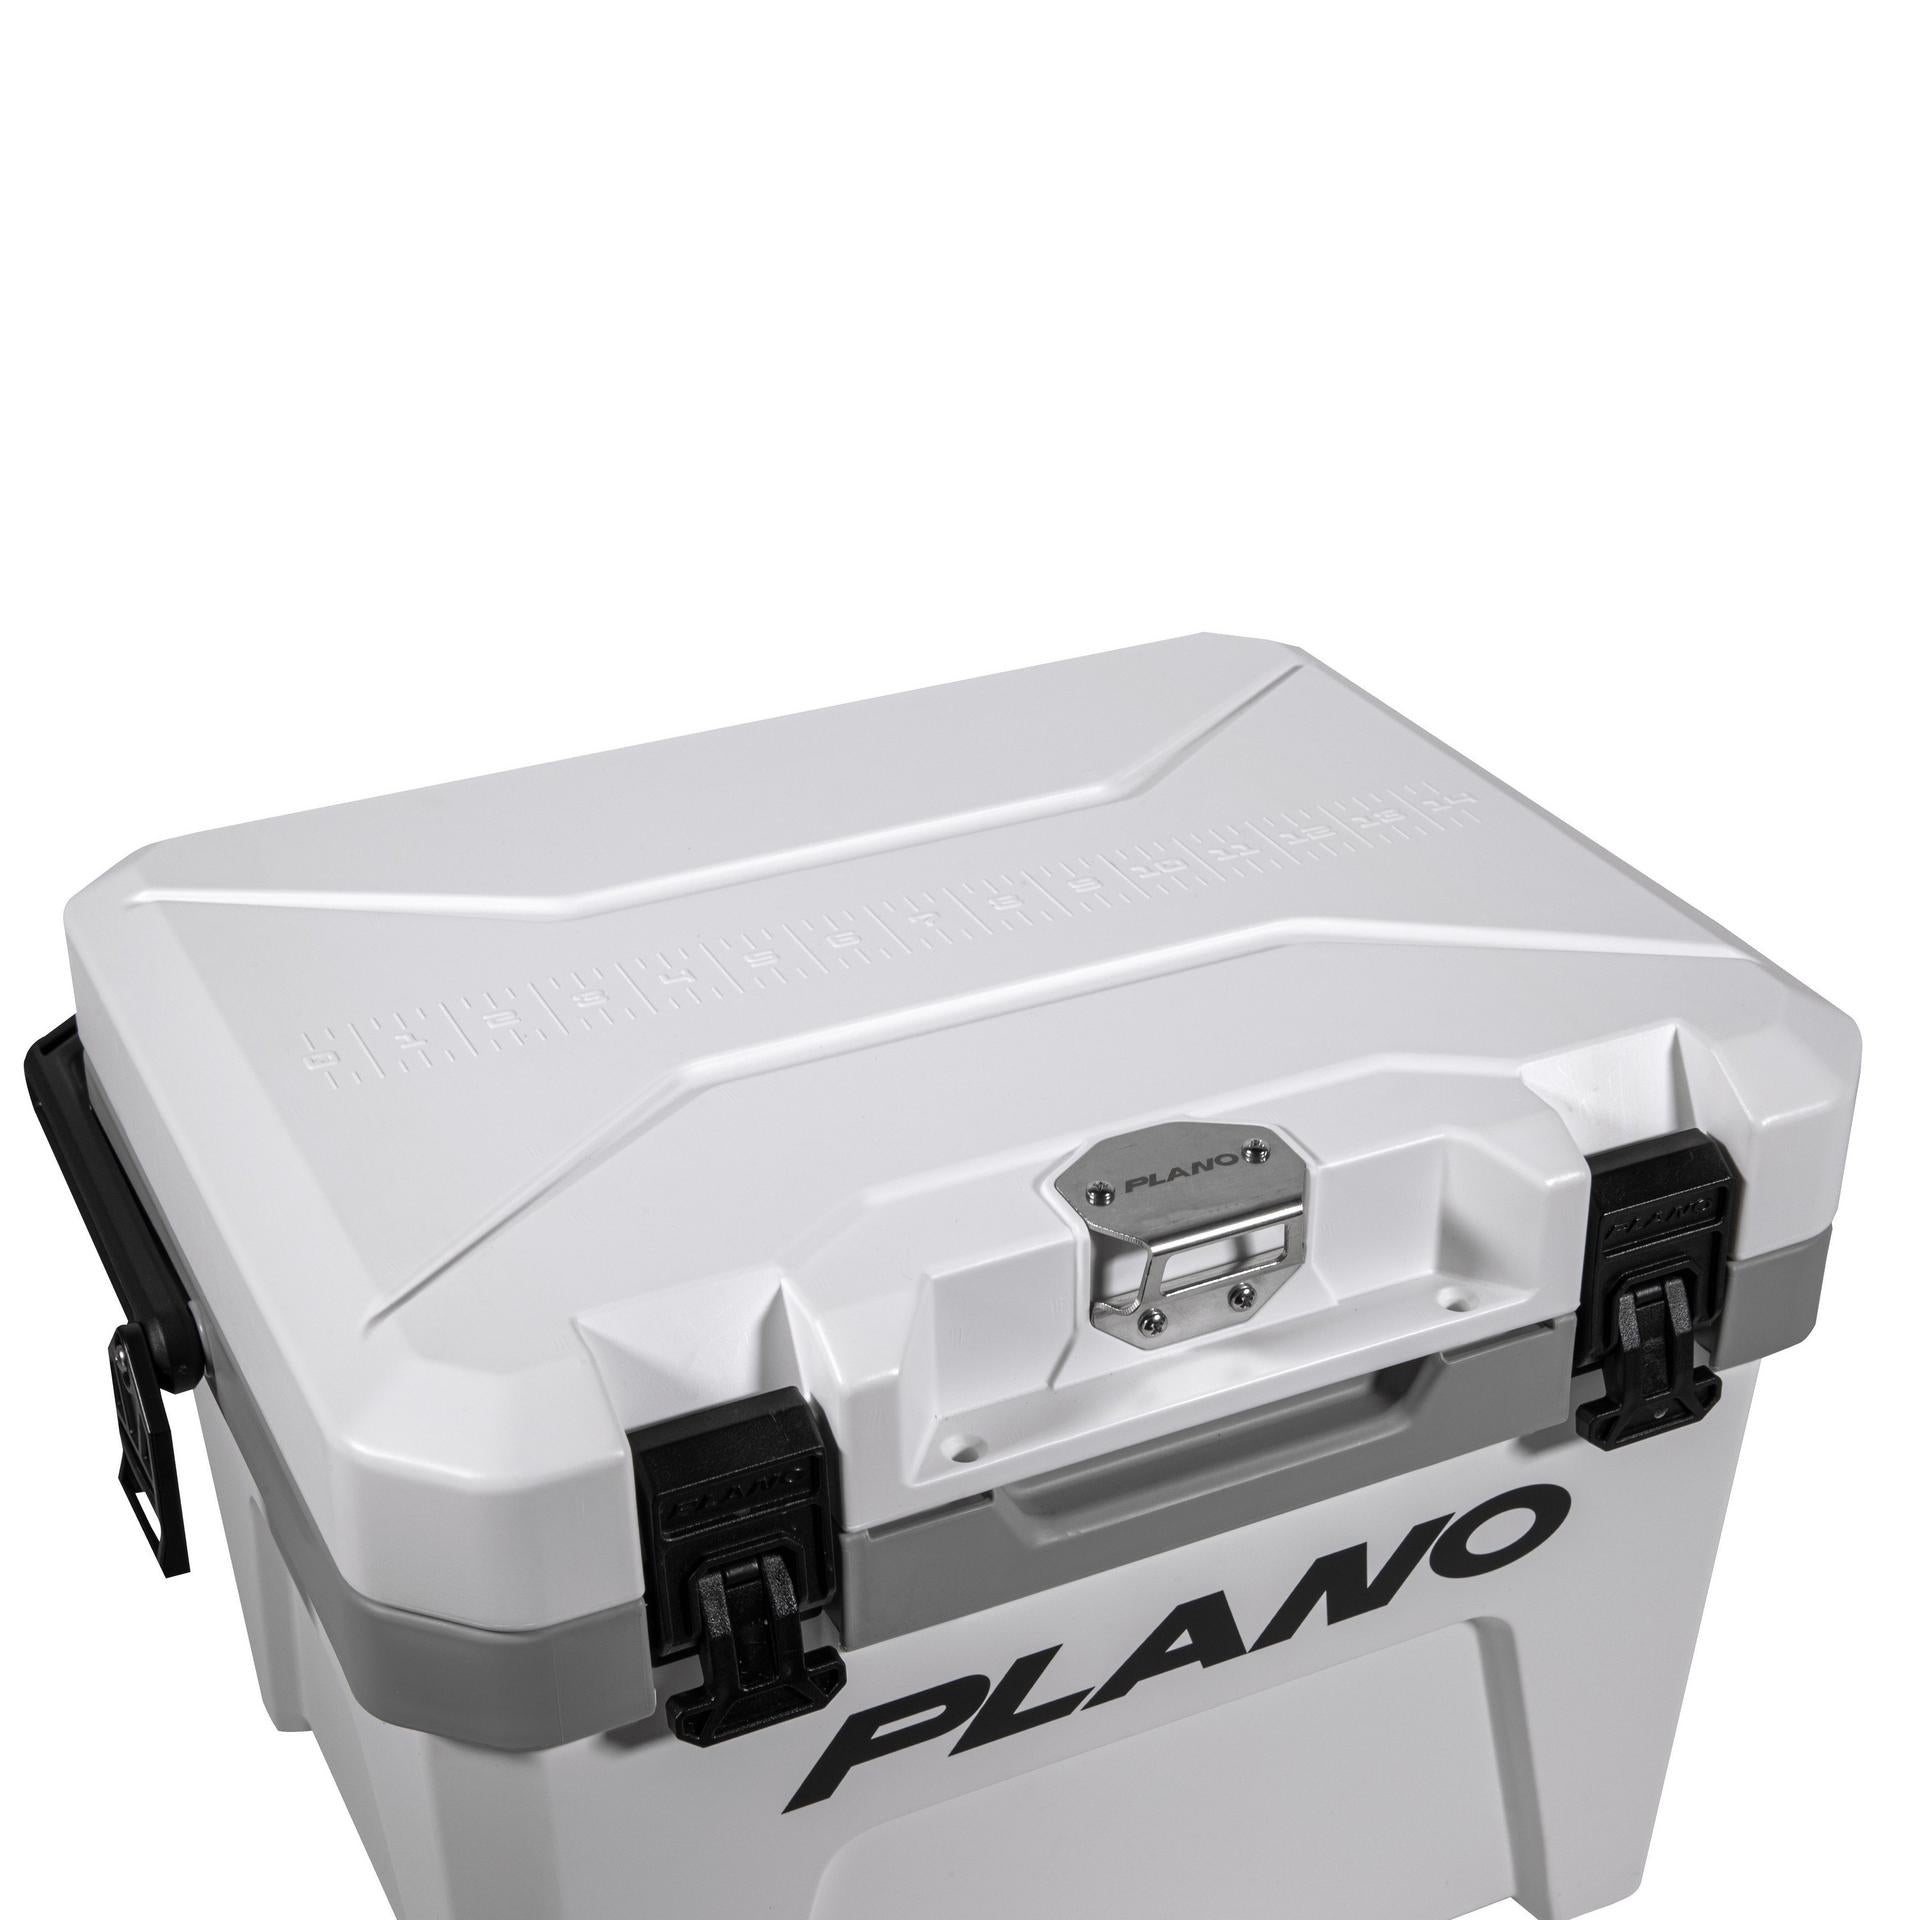 Frost Cooler - 21 Quart | Plano®